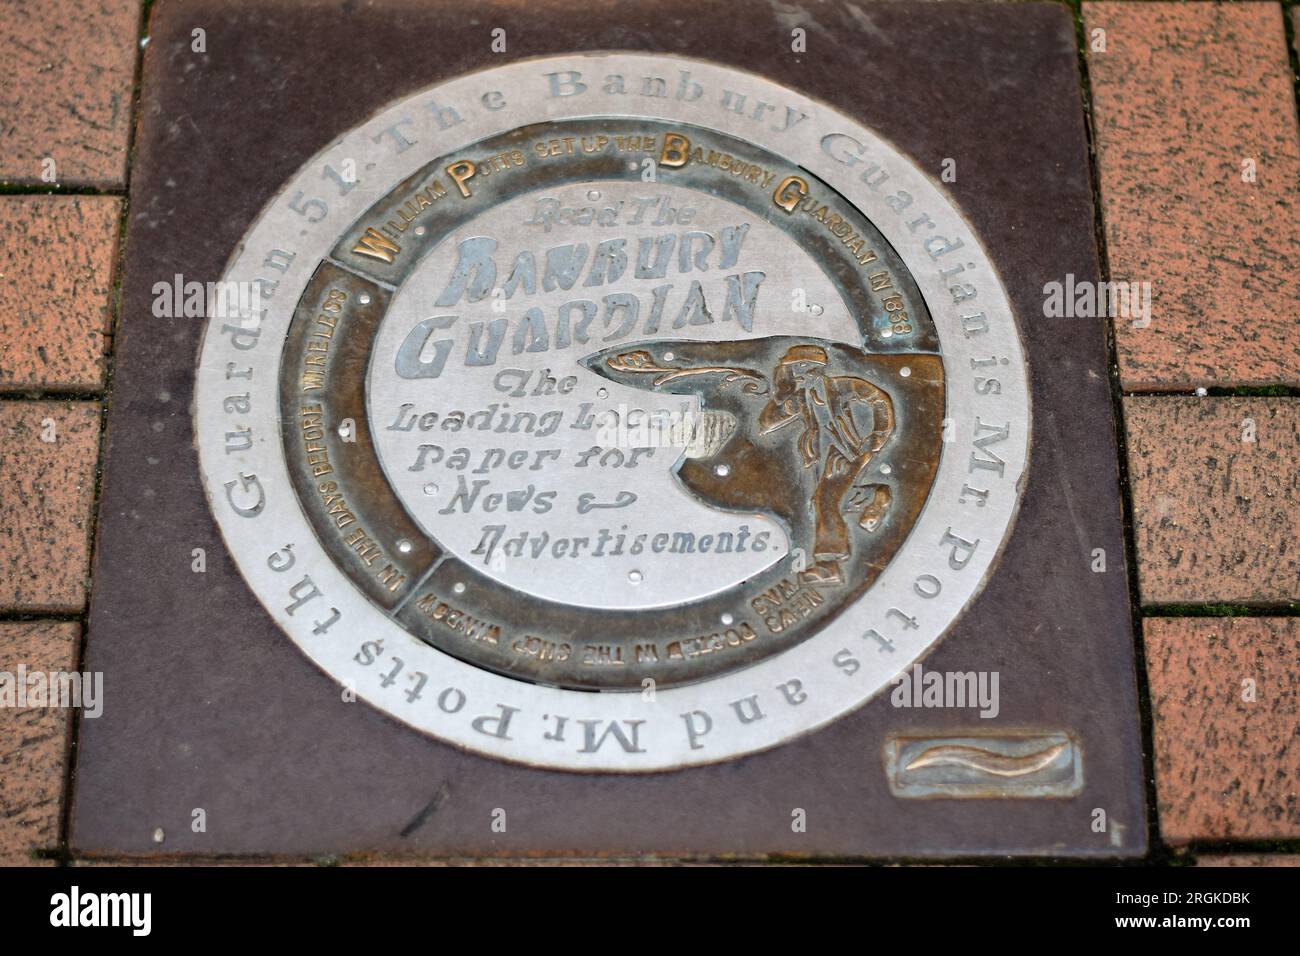 Bronze and steel marker at 16 Parson's Street in Banbury - marking the historical location of the Banbury Guardian printing works. Stock Photo